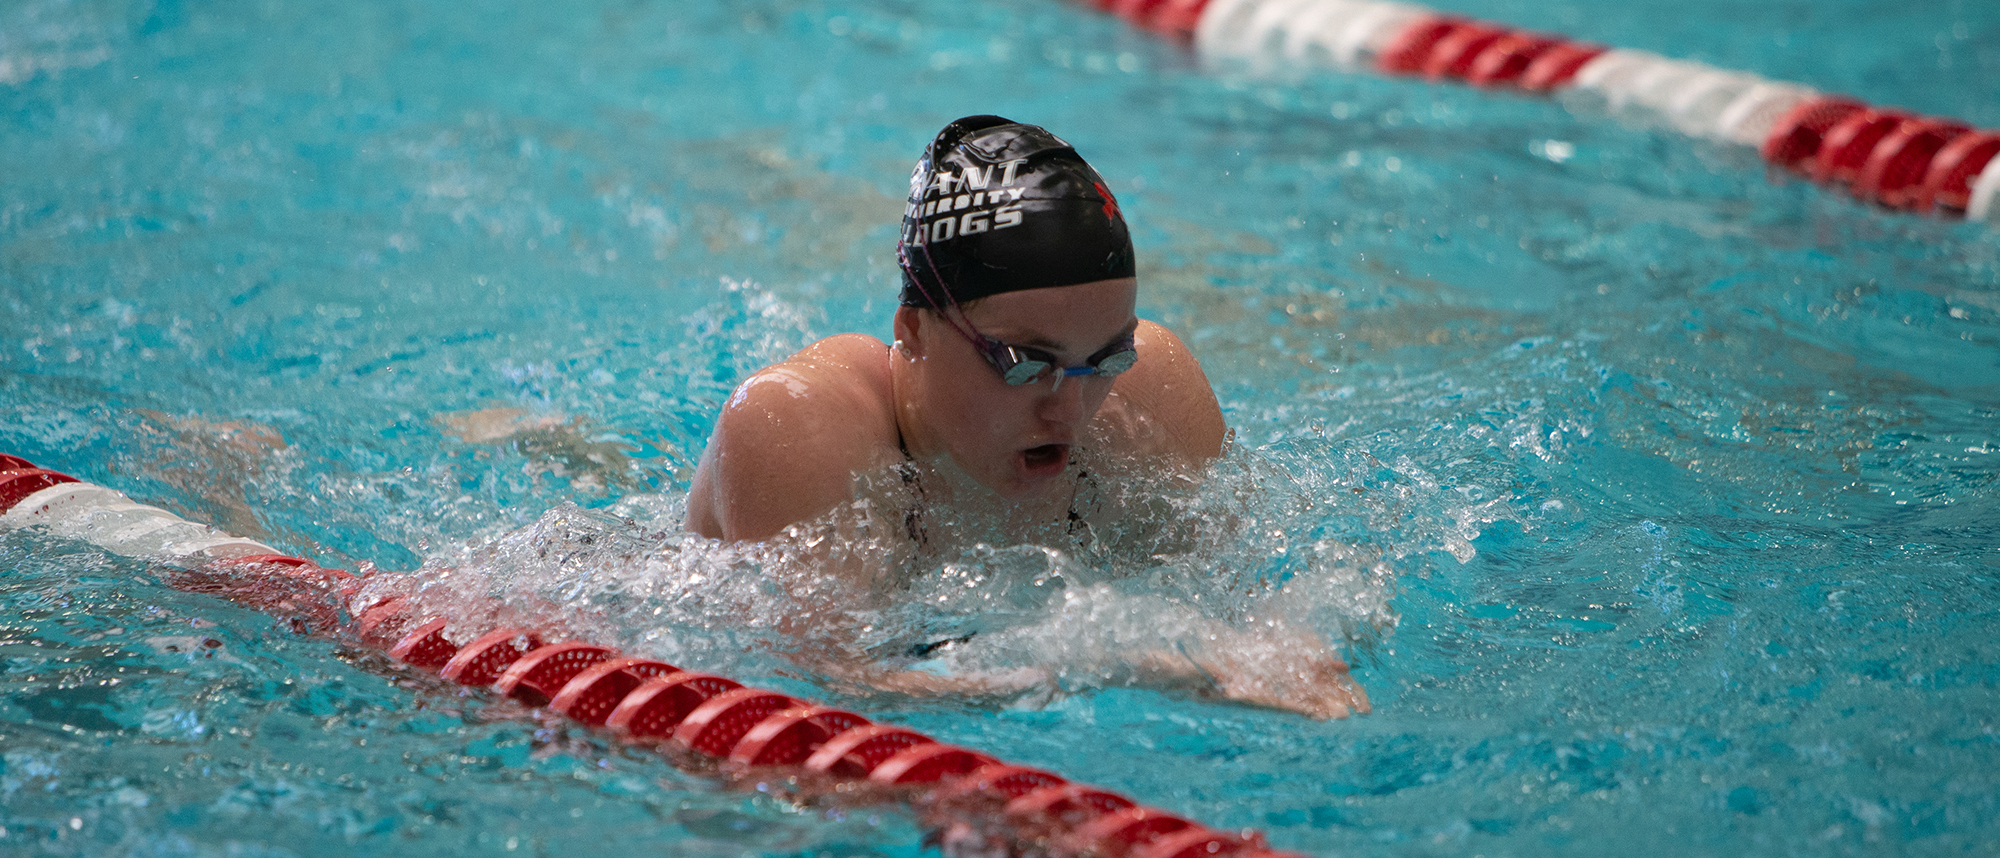 The Bulldogs defeat UMass during Friday afternoon meet